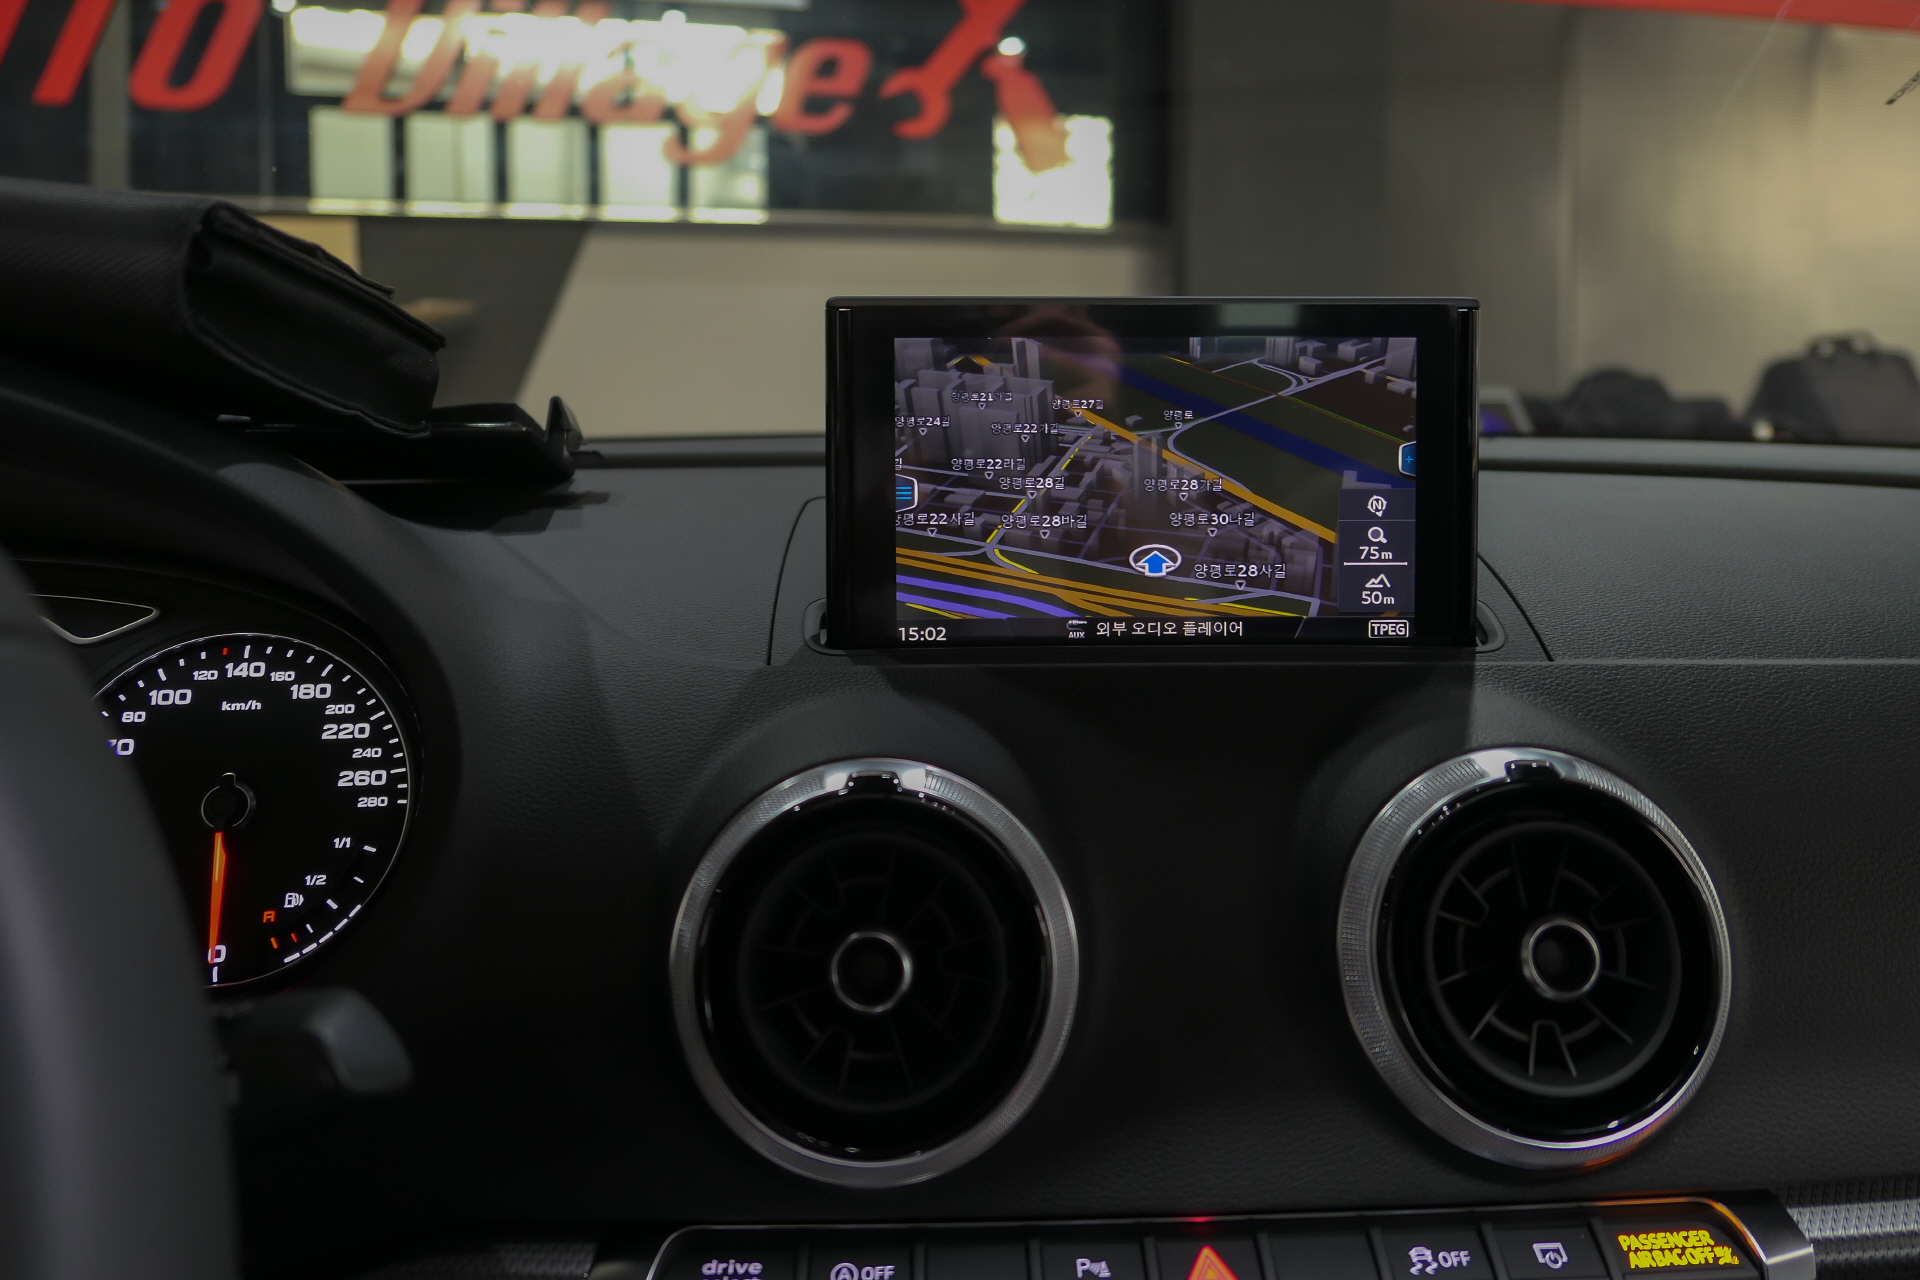 Android System for 2018 Audi A3 "HD-LINK (IW-MIB2-N23)" "M2C100"